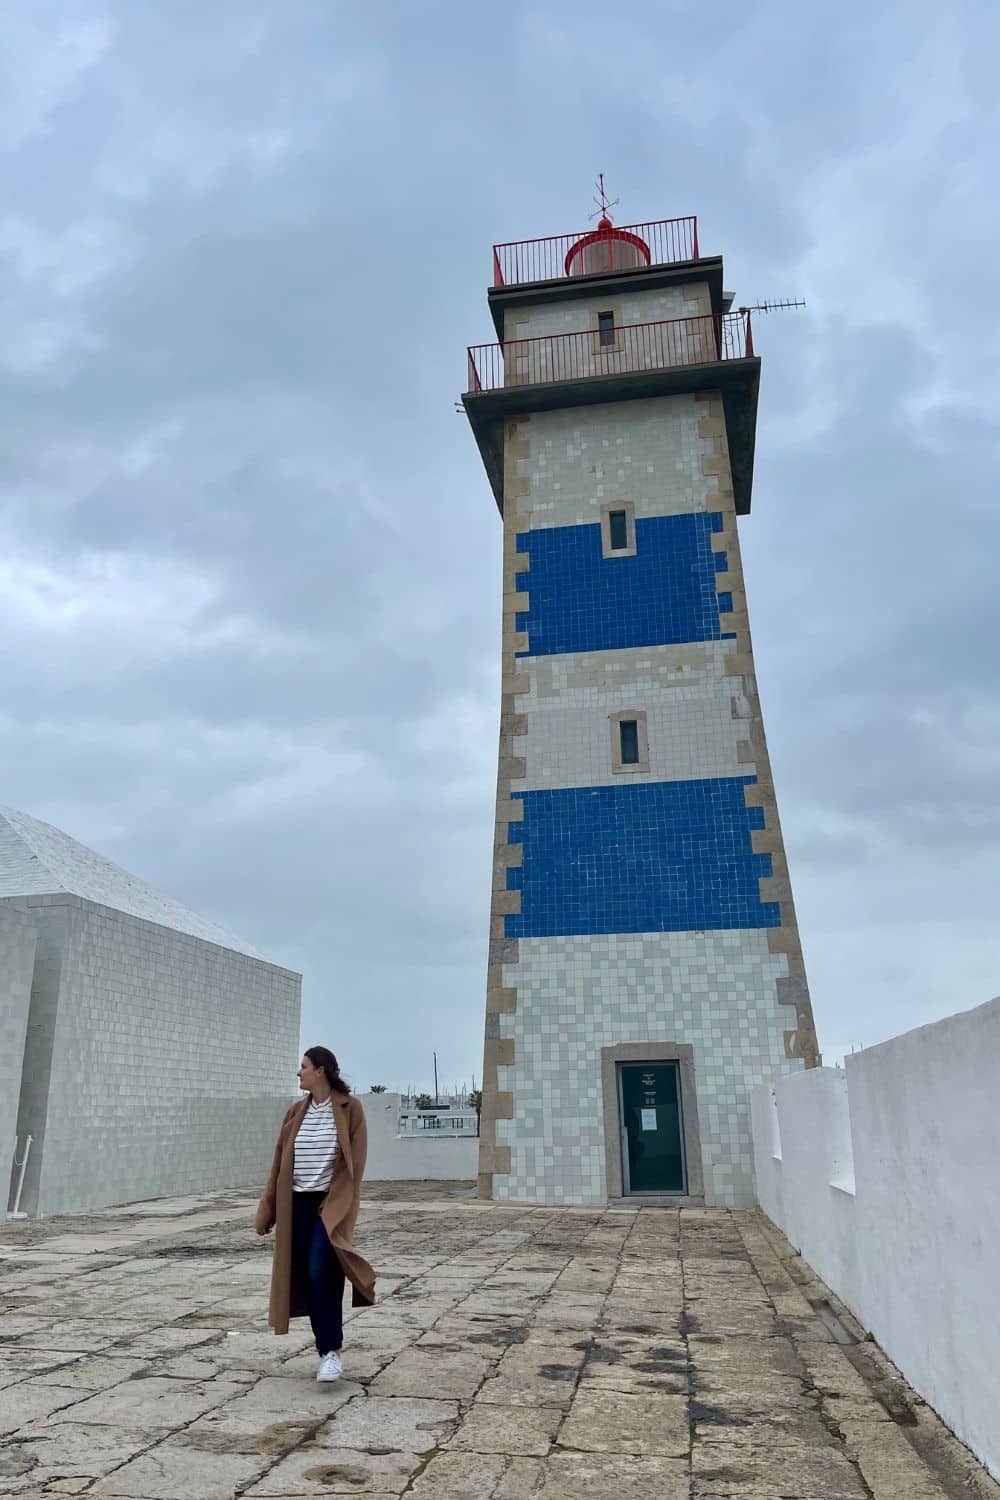 A woman in a long brown coat and white sneakers walks past a tall lighthouse with distinctive blue and white tiles, under a moody grey sky, highlighting the coastal heritage of Cascais